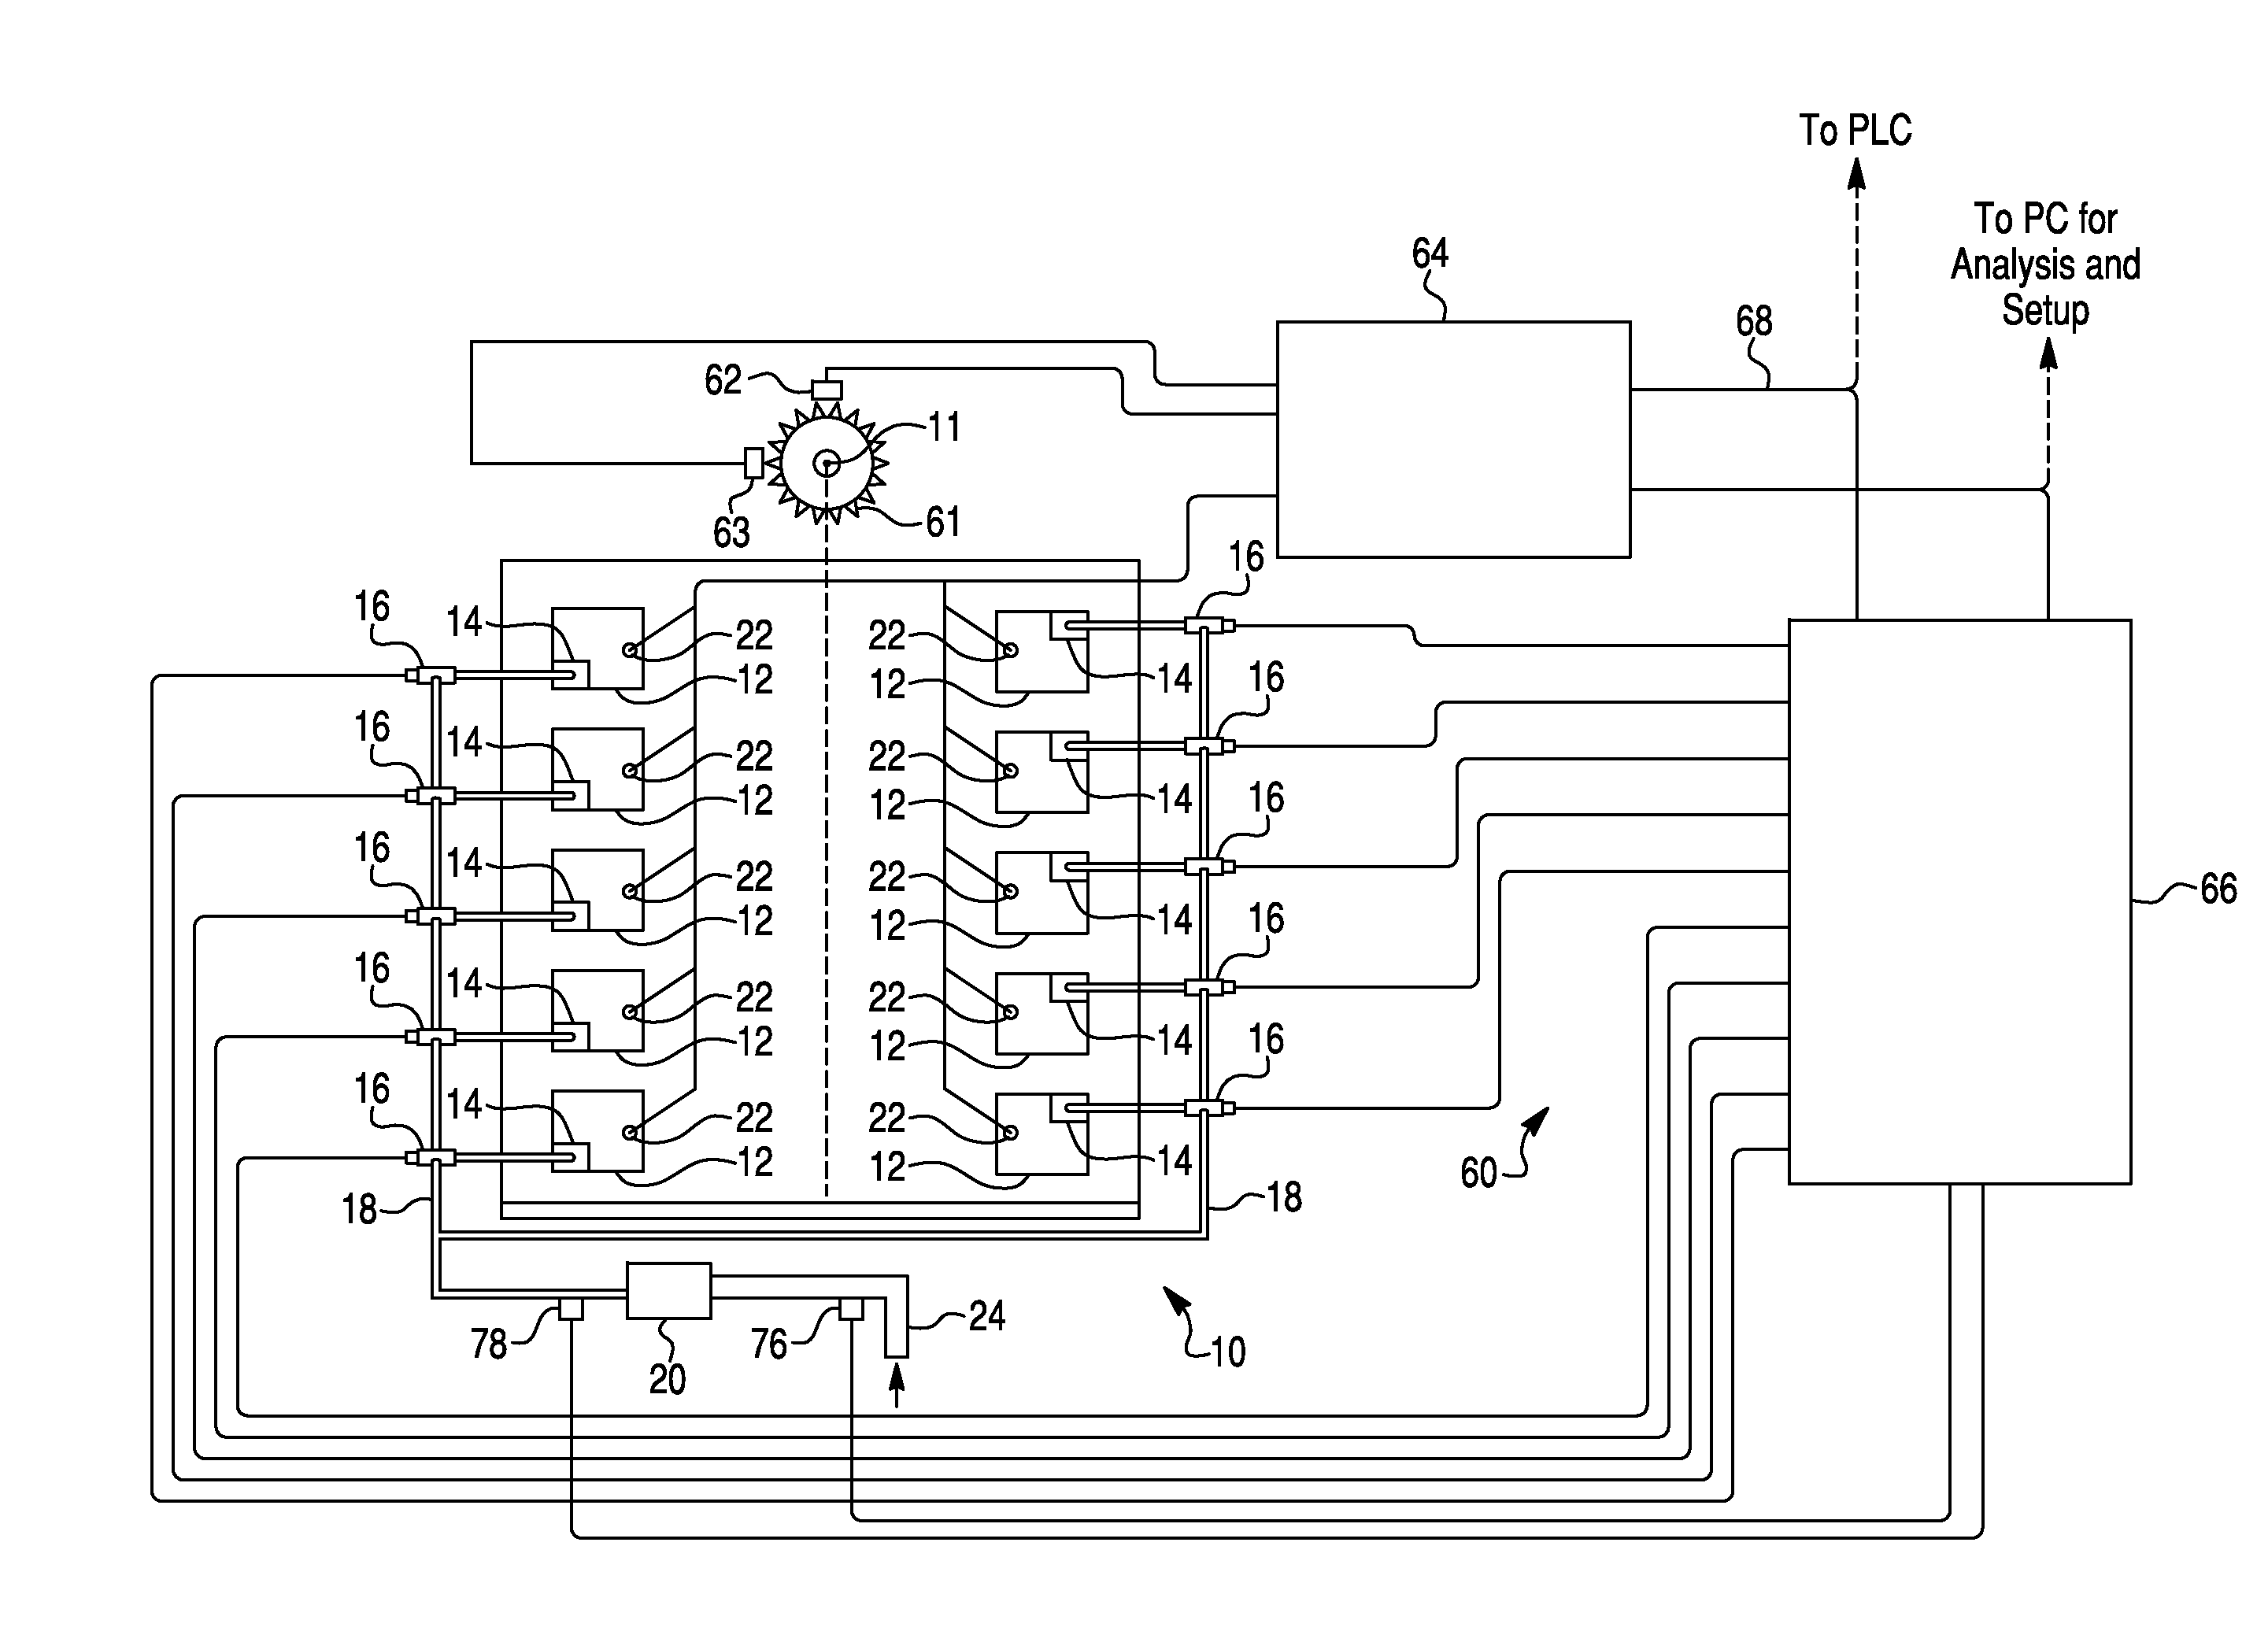 Method and apparatus for automatic pressure balancing of industrial large-bore internal combustion engines